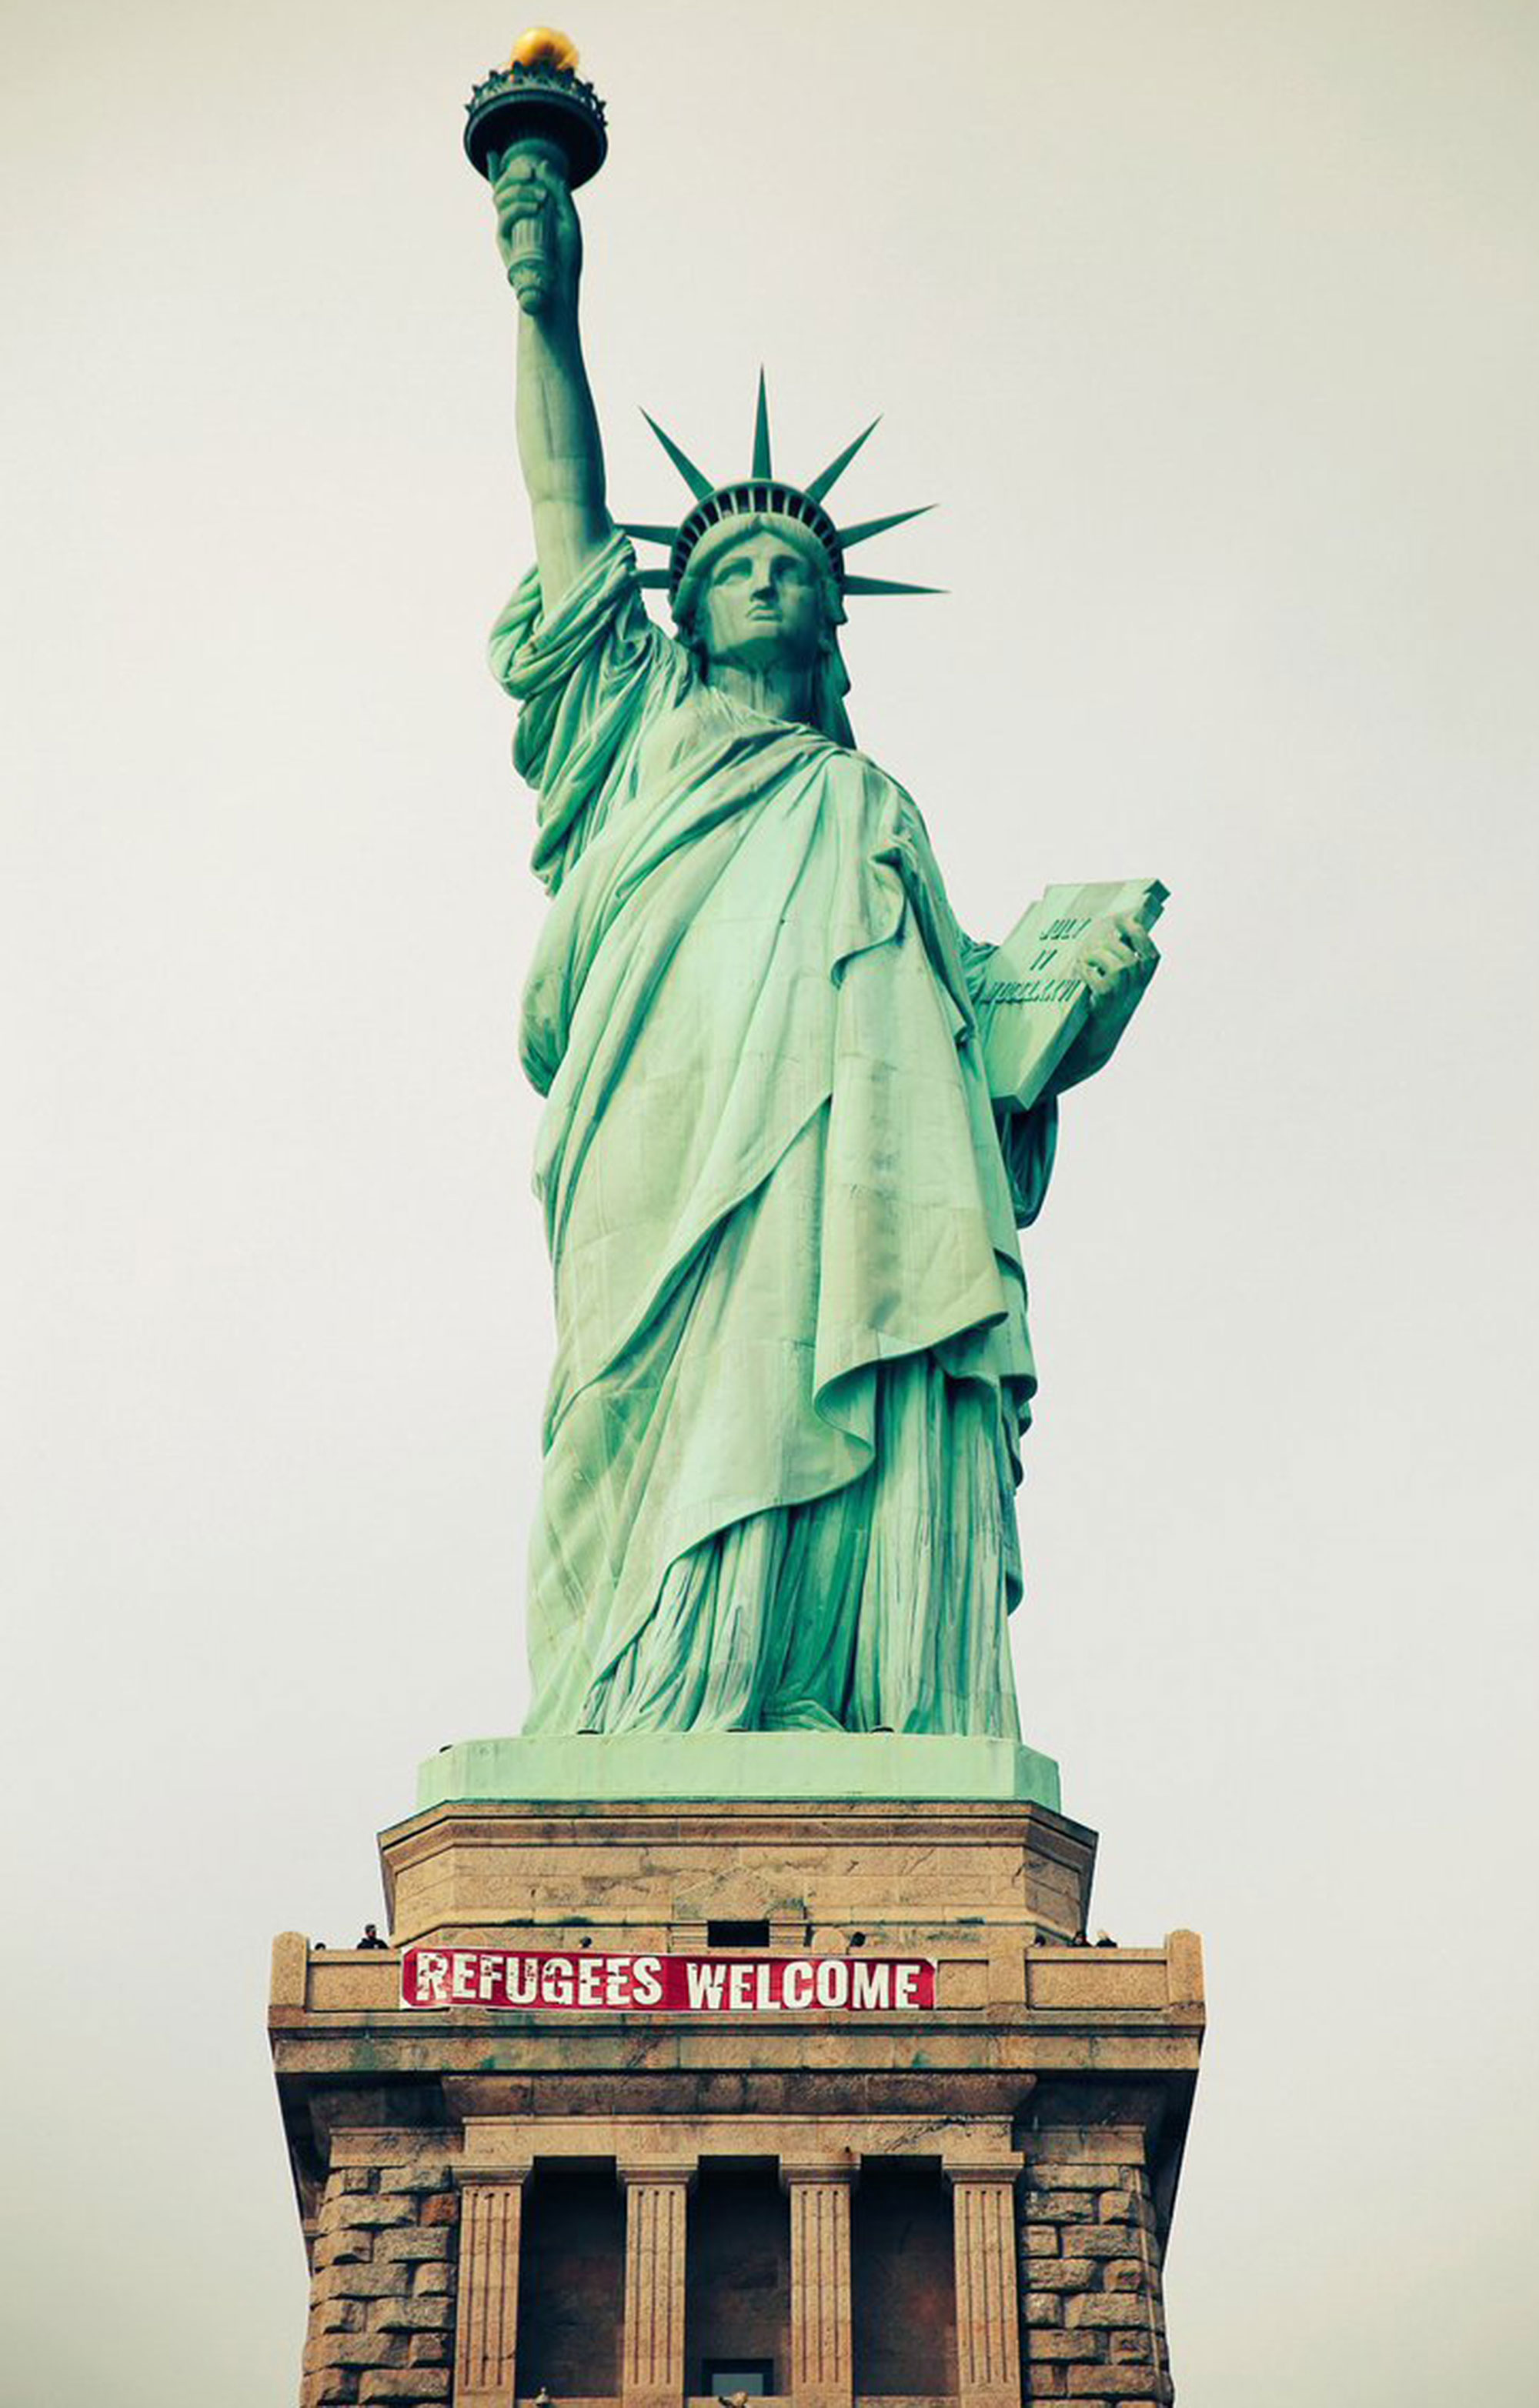 Refugees Welcome' Banner on Statue of Liberty | PEOPLE.com